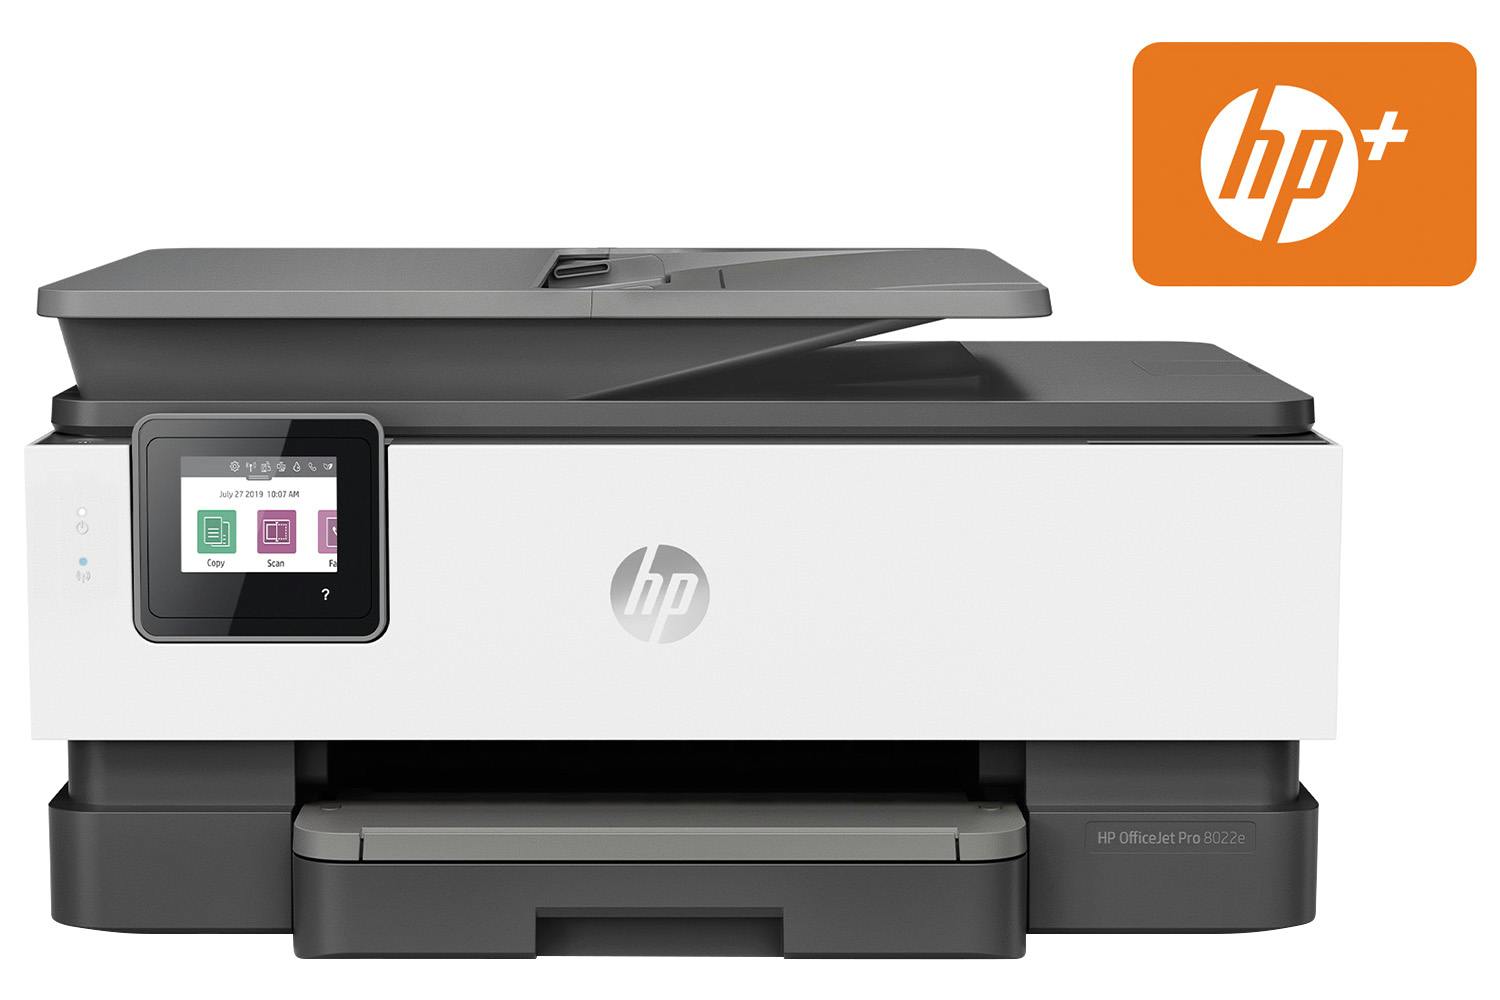 HP OfficeJet Pro 8022e All-in-One Wireless Colour Printer & 6 Months Instant Ink